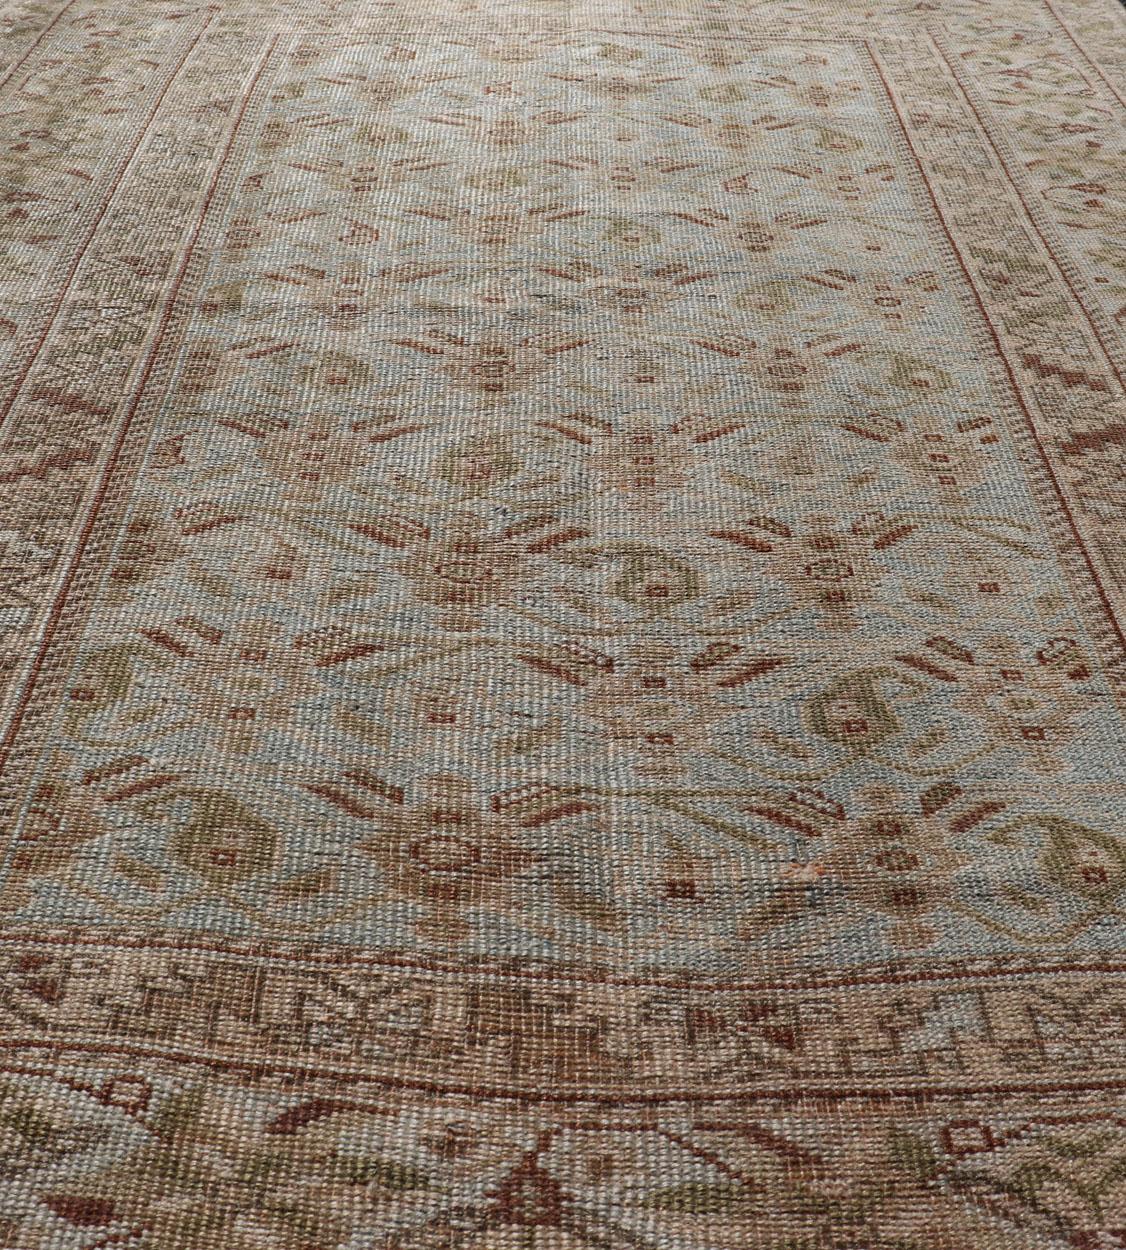 Malayer  Fine Persian Antique Afshar Rug in Green, Browns, and Blue Tribal Carpet  For Sale